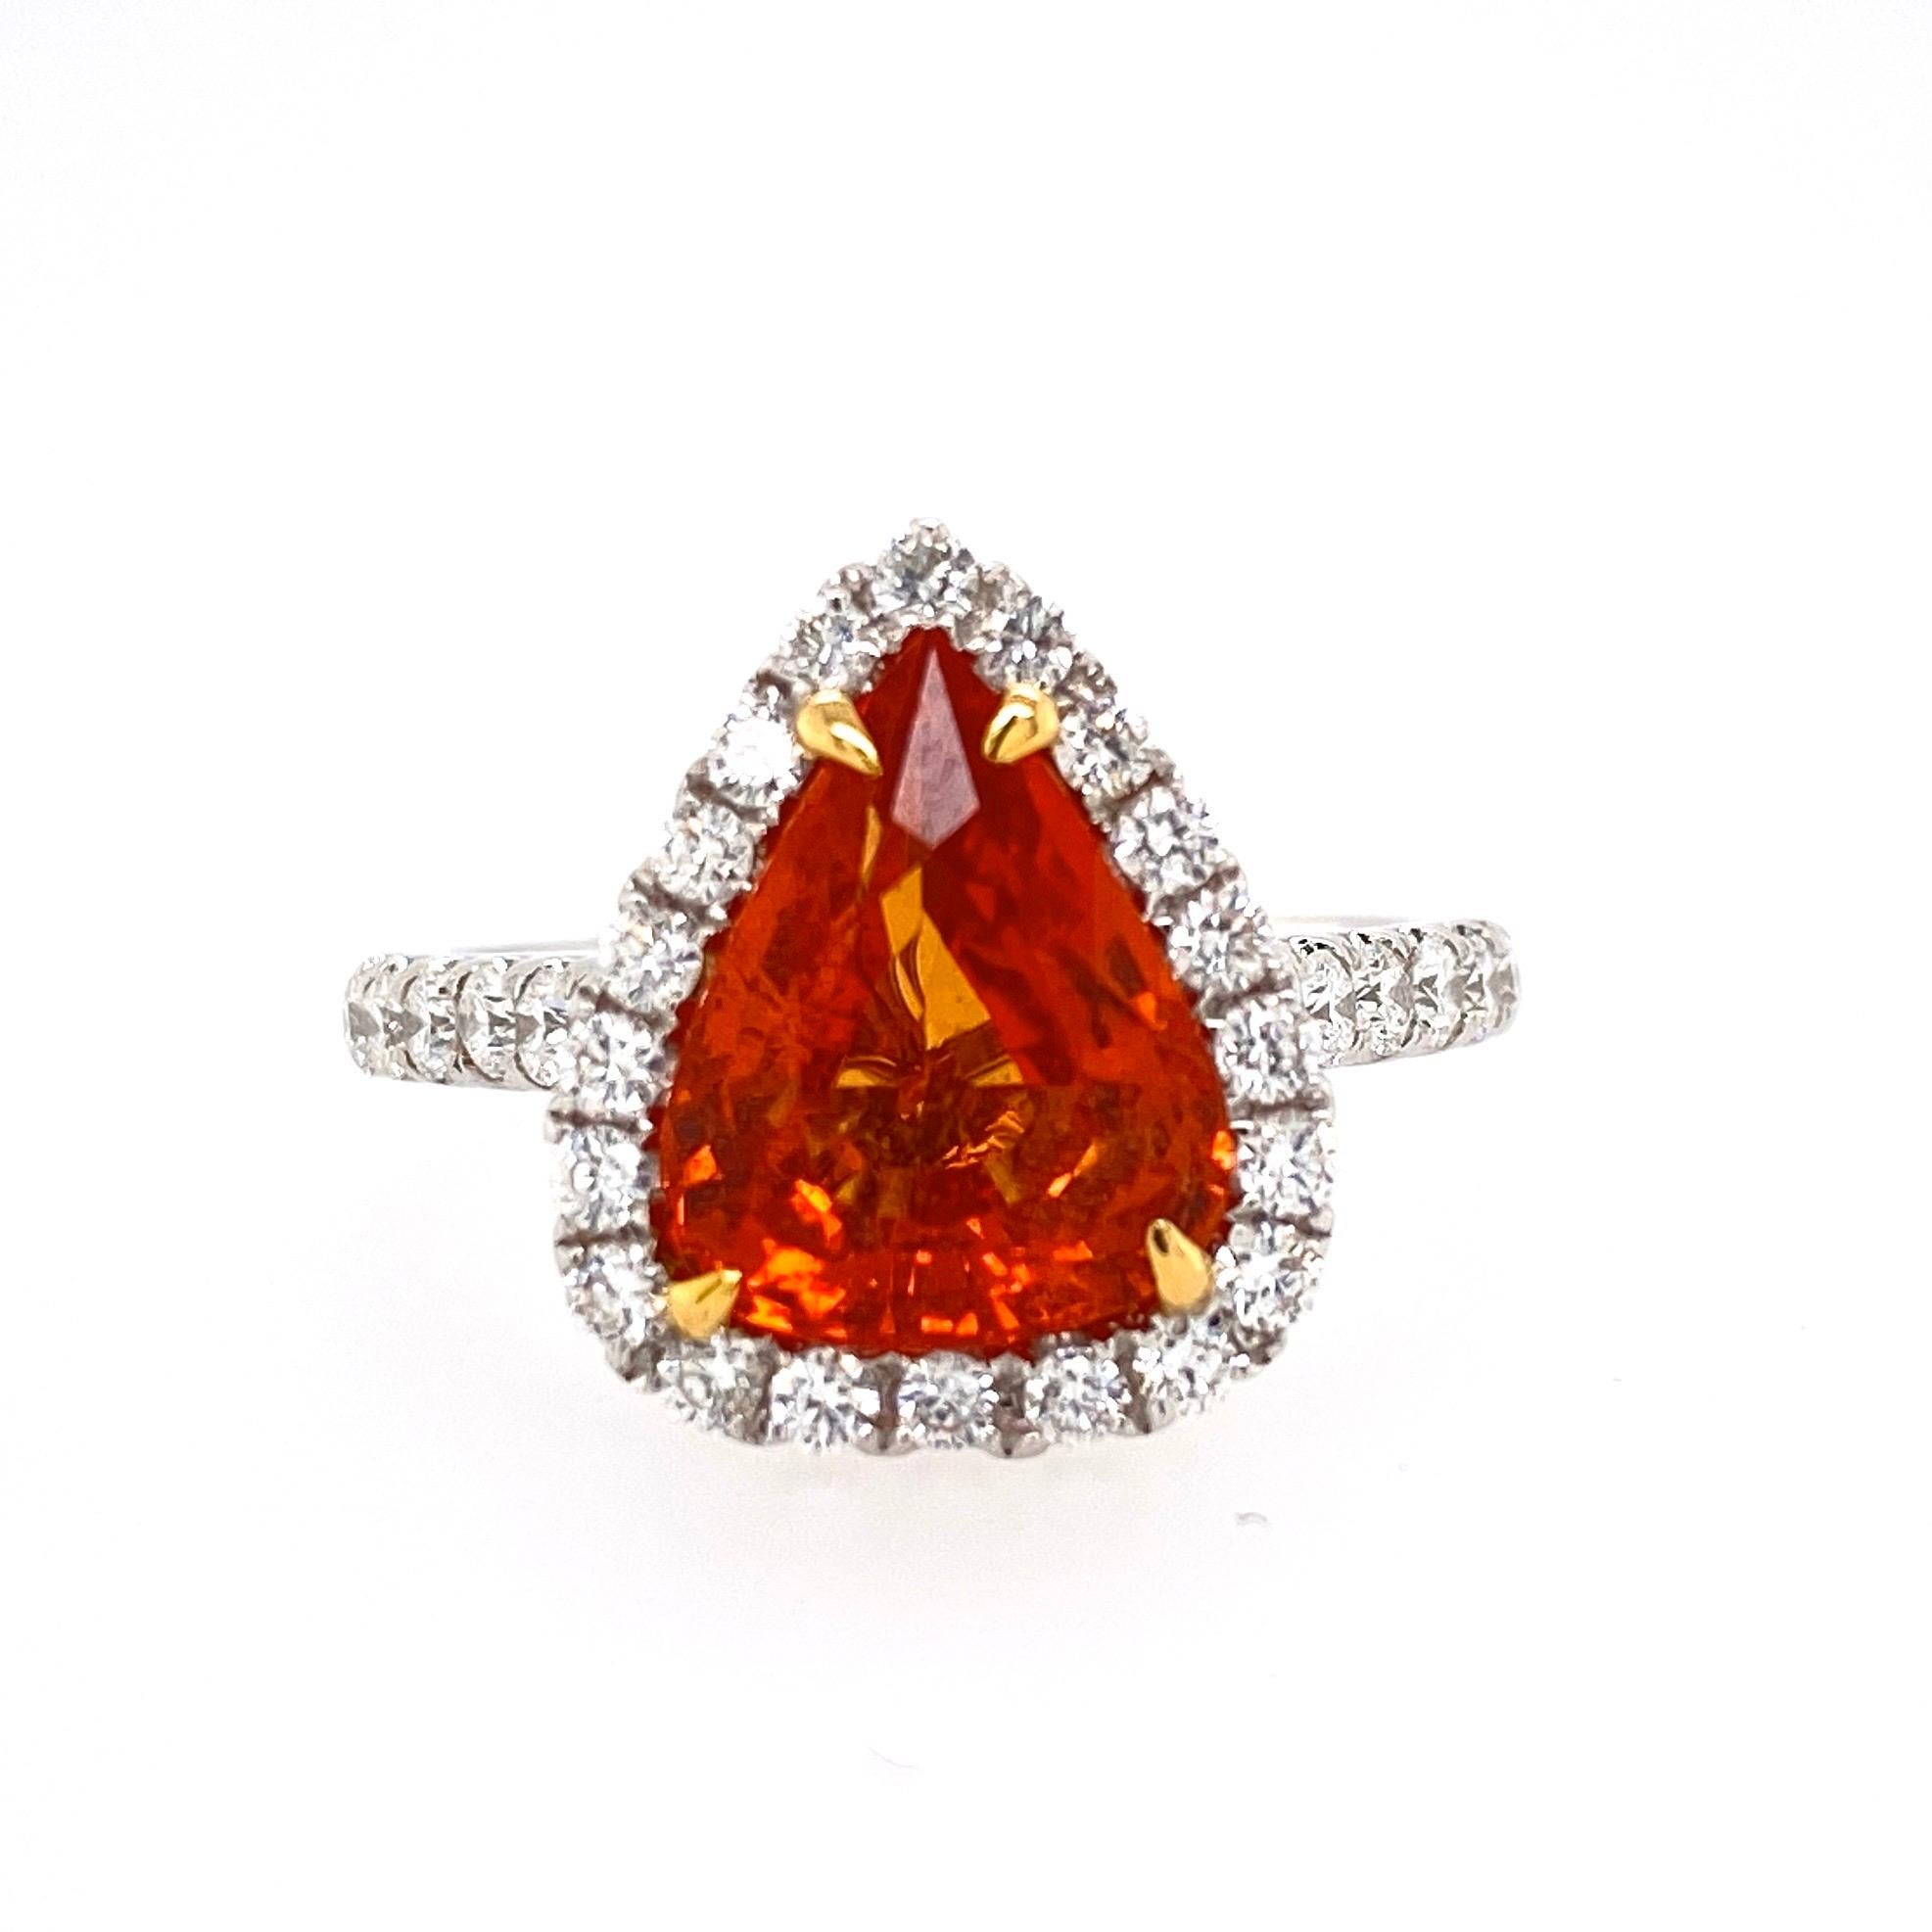 This beautiful cocktail ring features a stunning 3.46 Carat Pear Shape Orange Sapphire with a Diamond Halo, on a Diamond Shank. This ring is set in 18k White Gold, with 18k Yellow gold prongs on the center stone. Total Diamond Weight = 0.67 Carats.